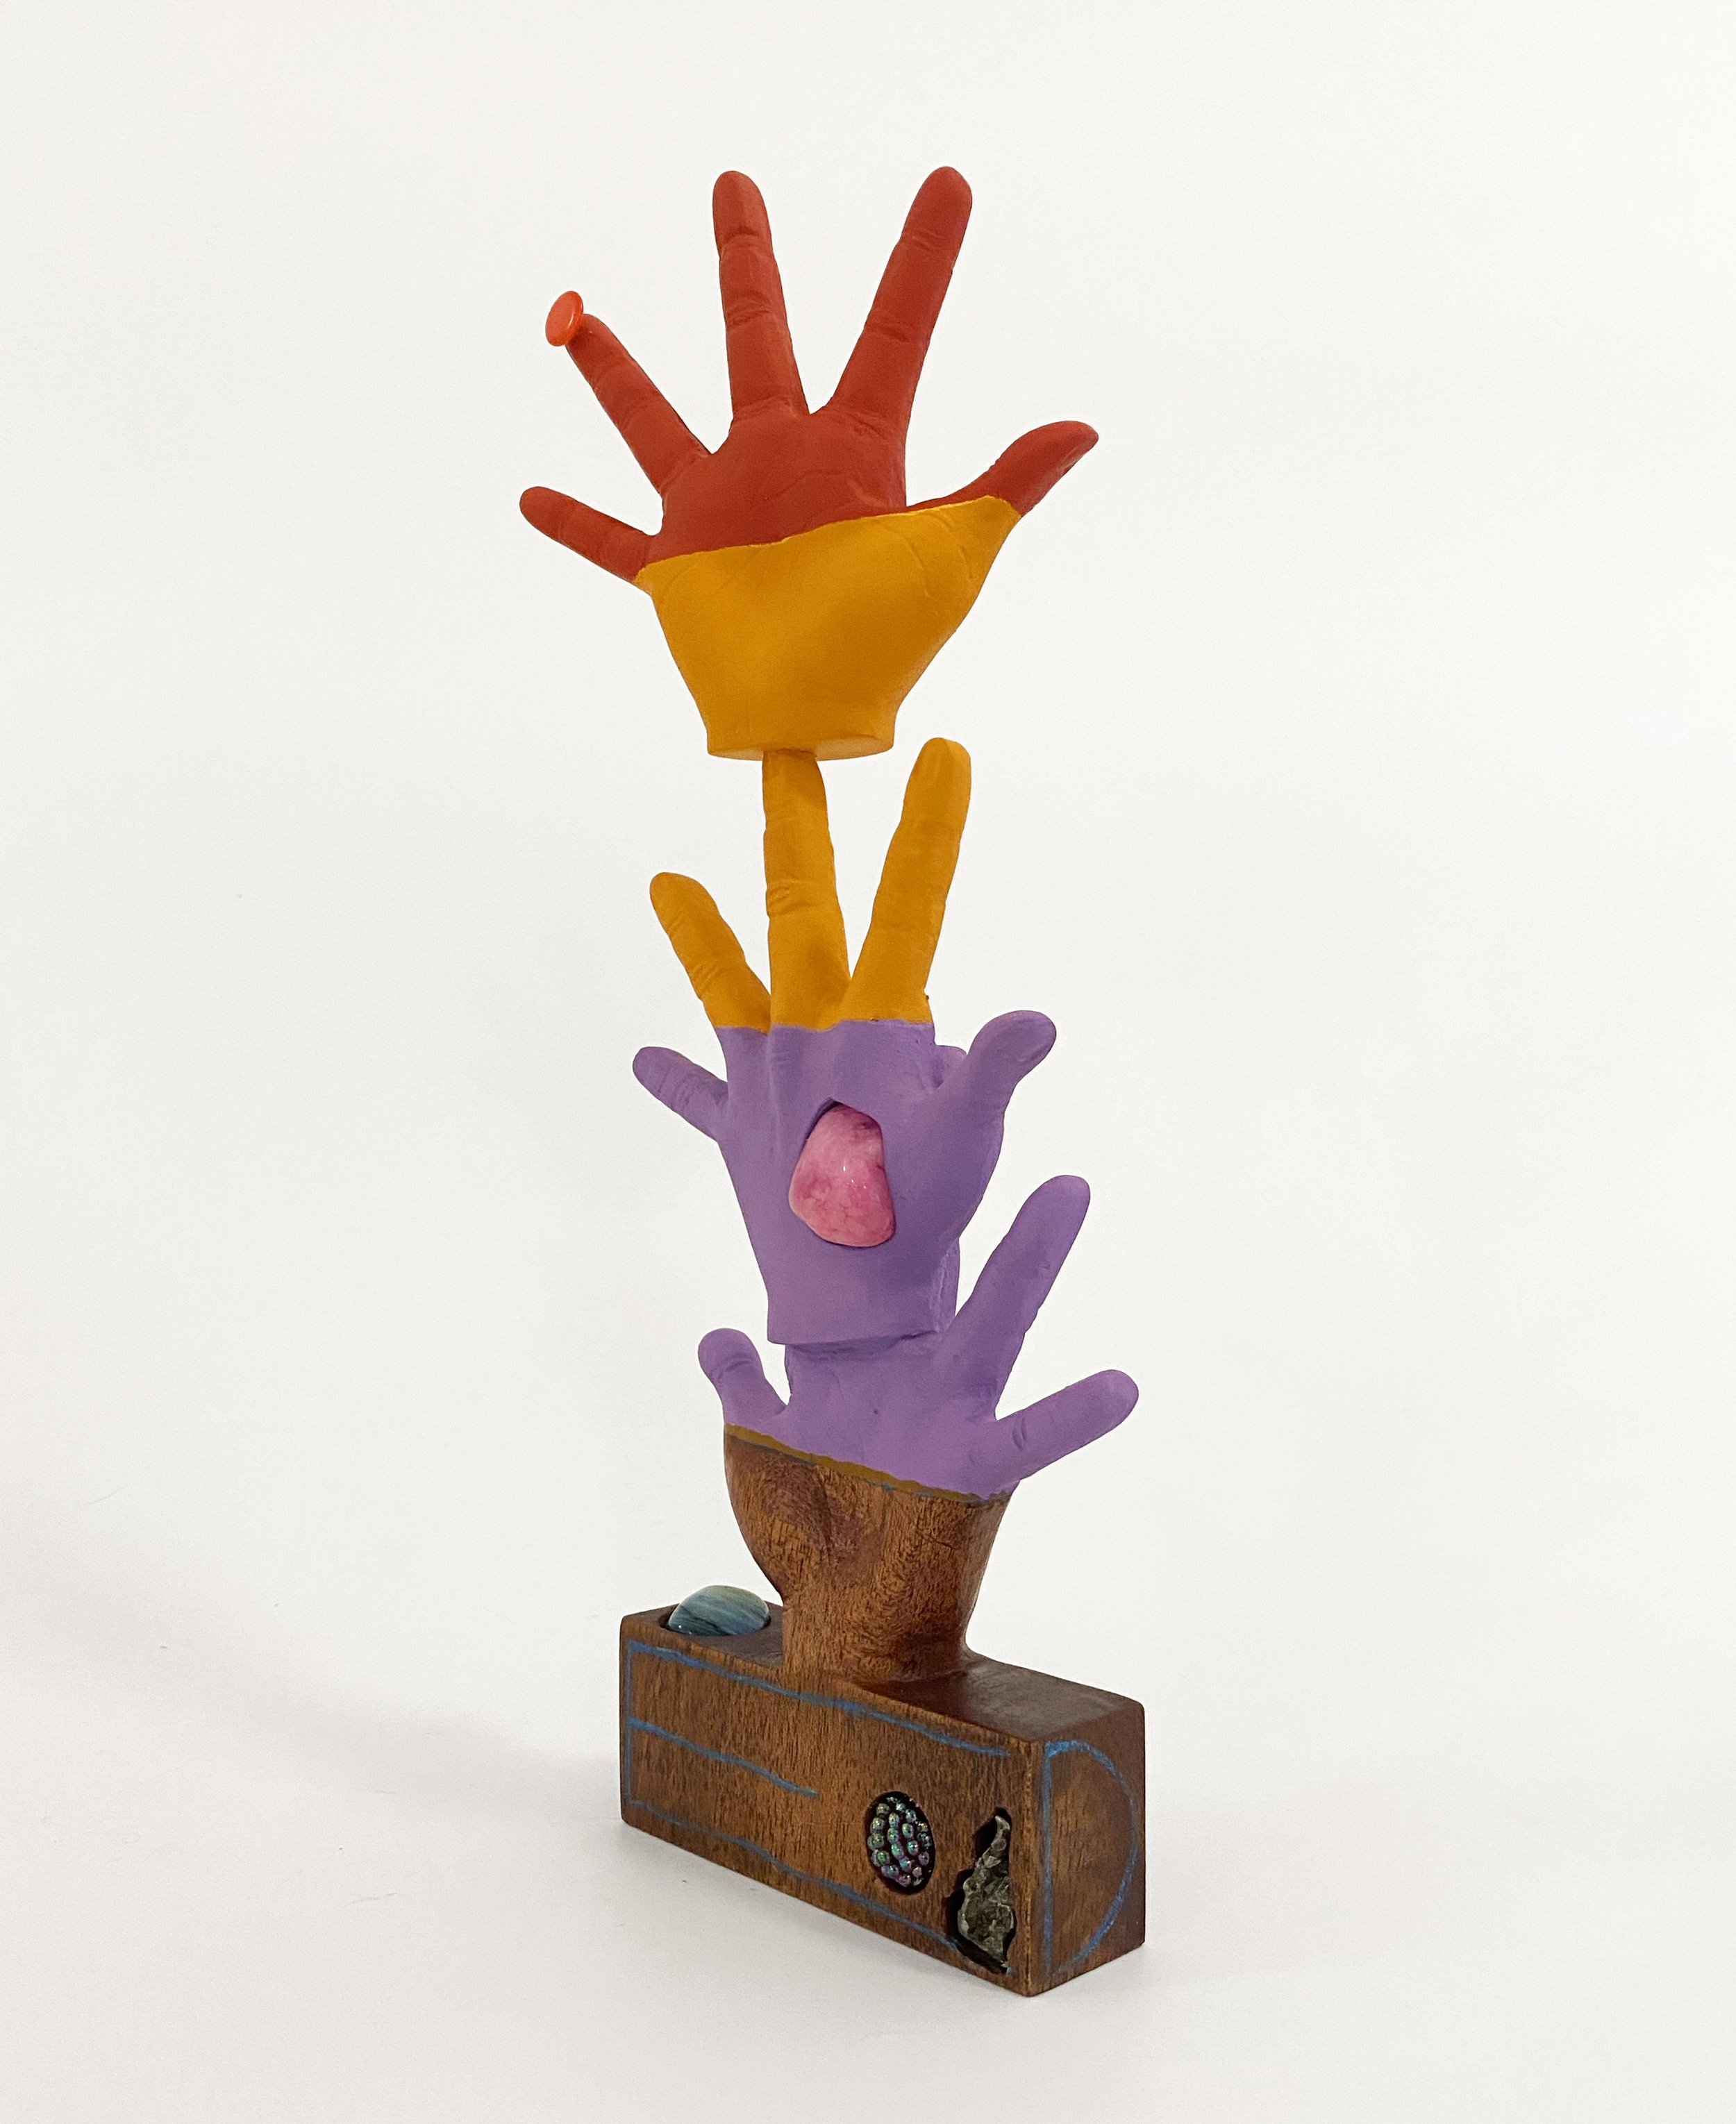   Hand Tree , 2023, meteorite, thumb tack, bread, rocks, casein, colored pencil, and carved mahogany, 12” x 4” x 2” 